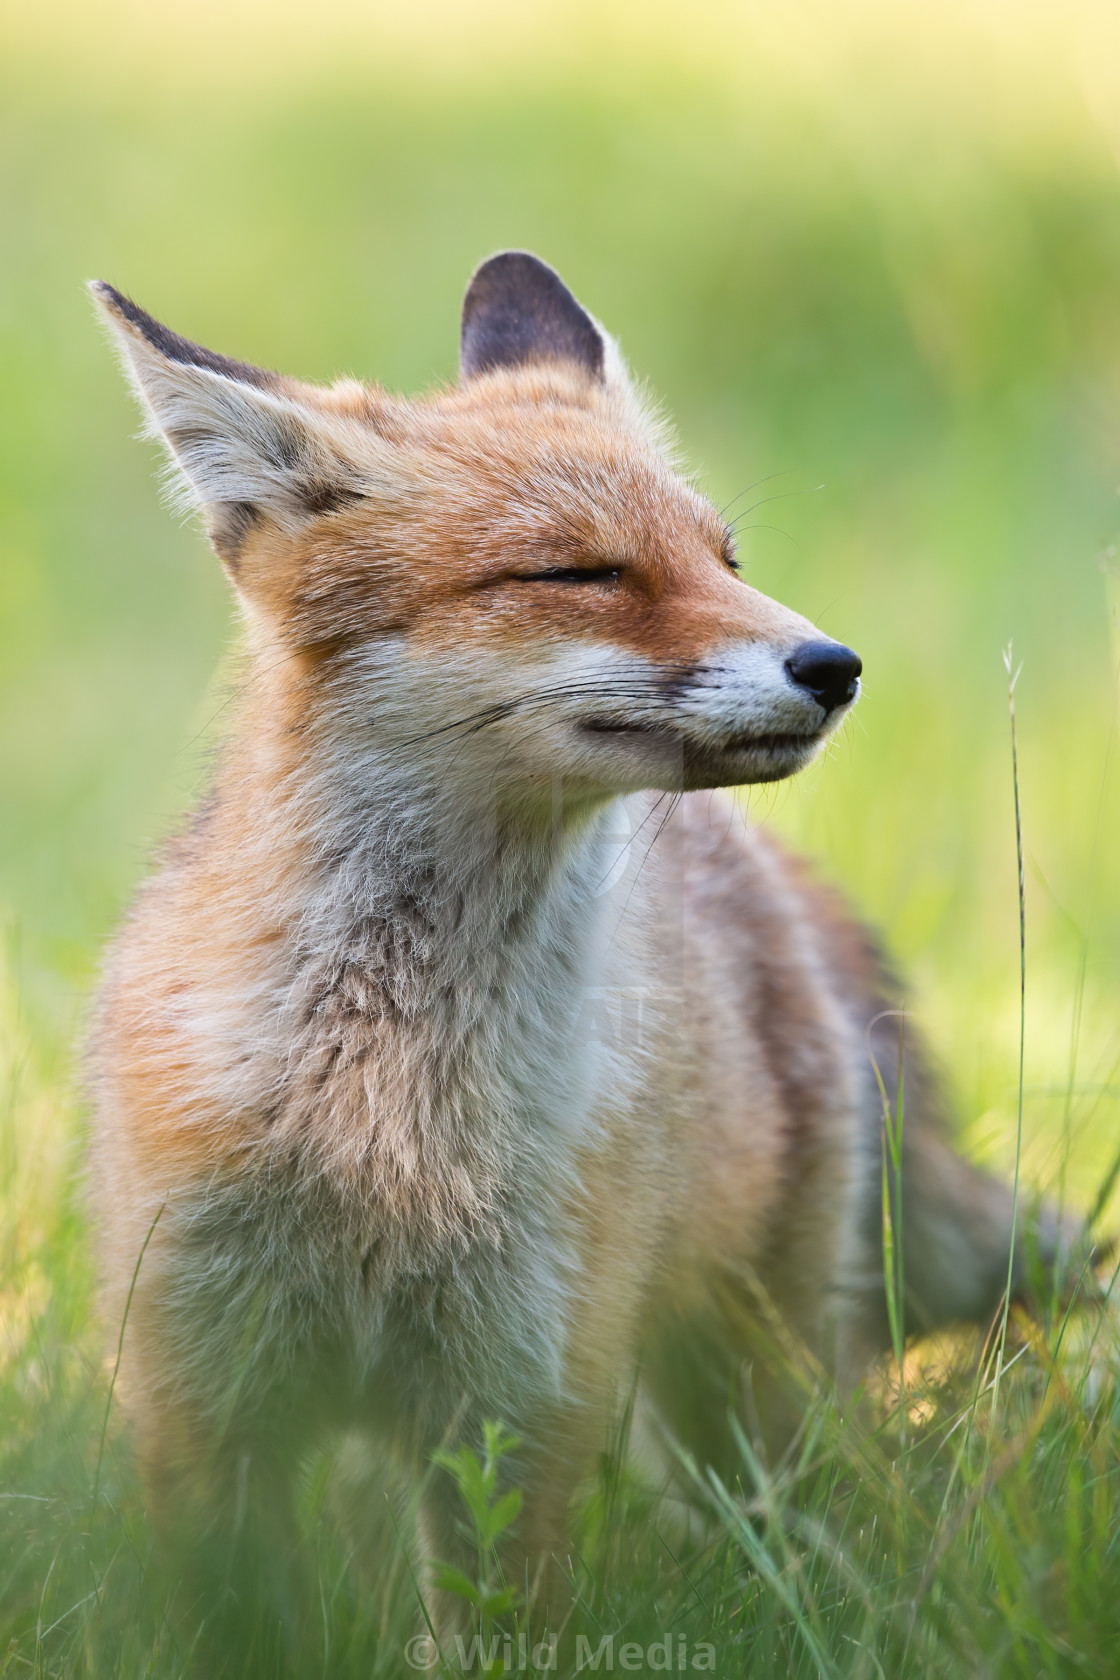 "Cheerful red fox sniffing with snout up and eyes closed enjoying summer day" stock image